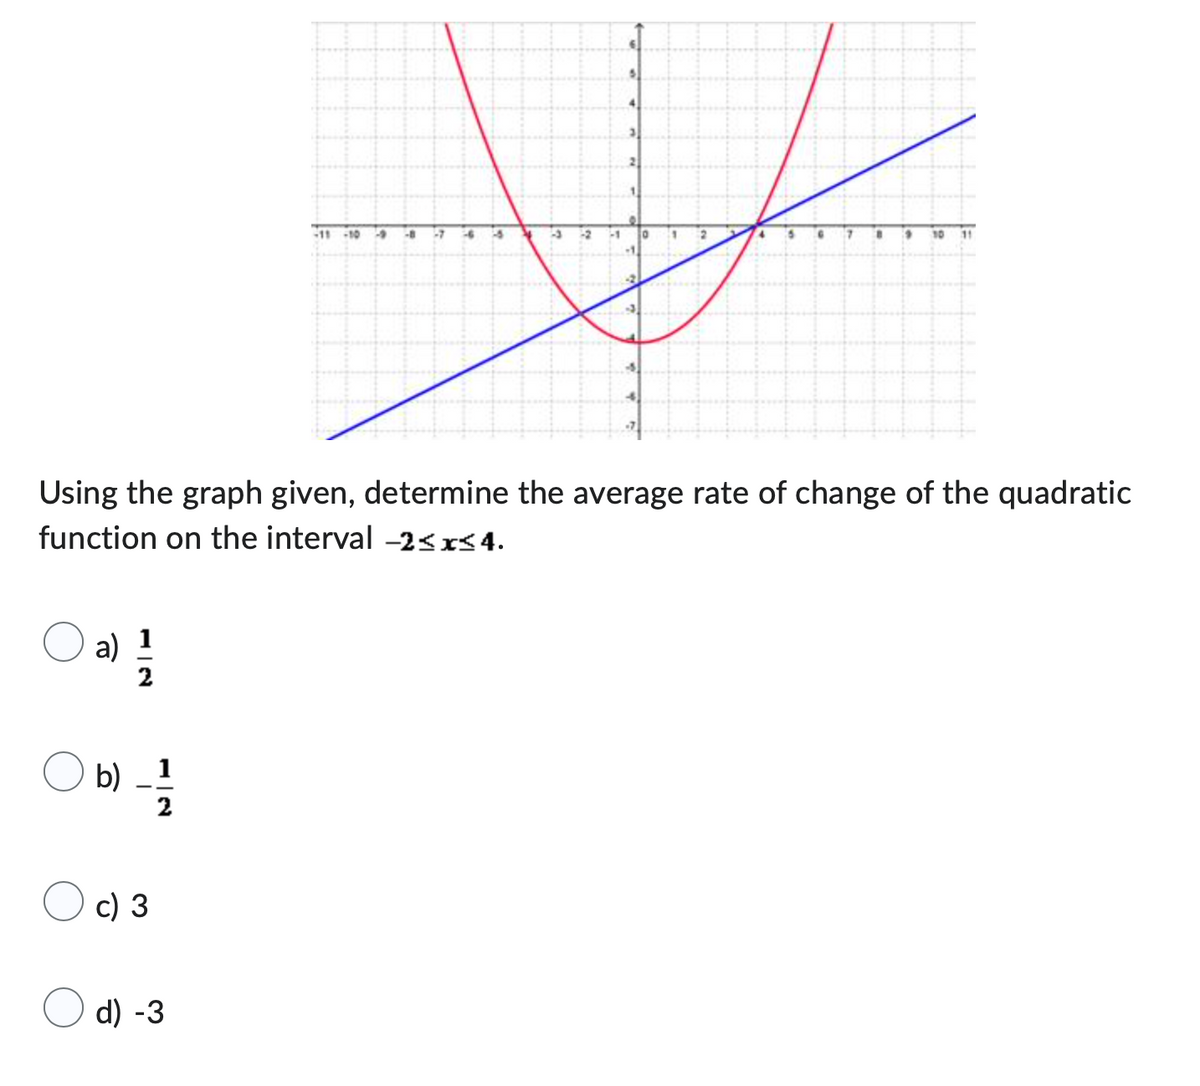 b) 1
c) 3
-11 -10
d) -3
-1
Using the graph given, determine the average rate of change of the quadratic
function on the interval -2≤x≤4.
○ a) 1/2
-1
o